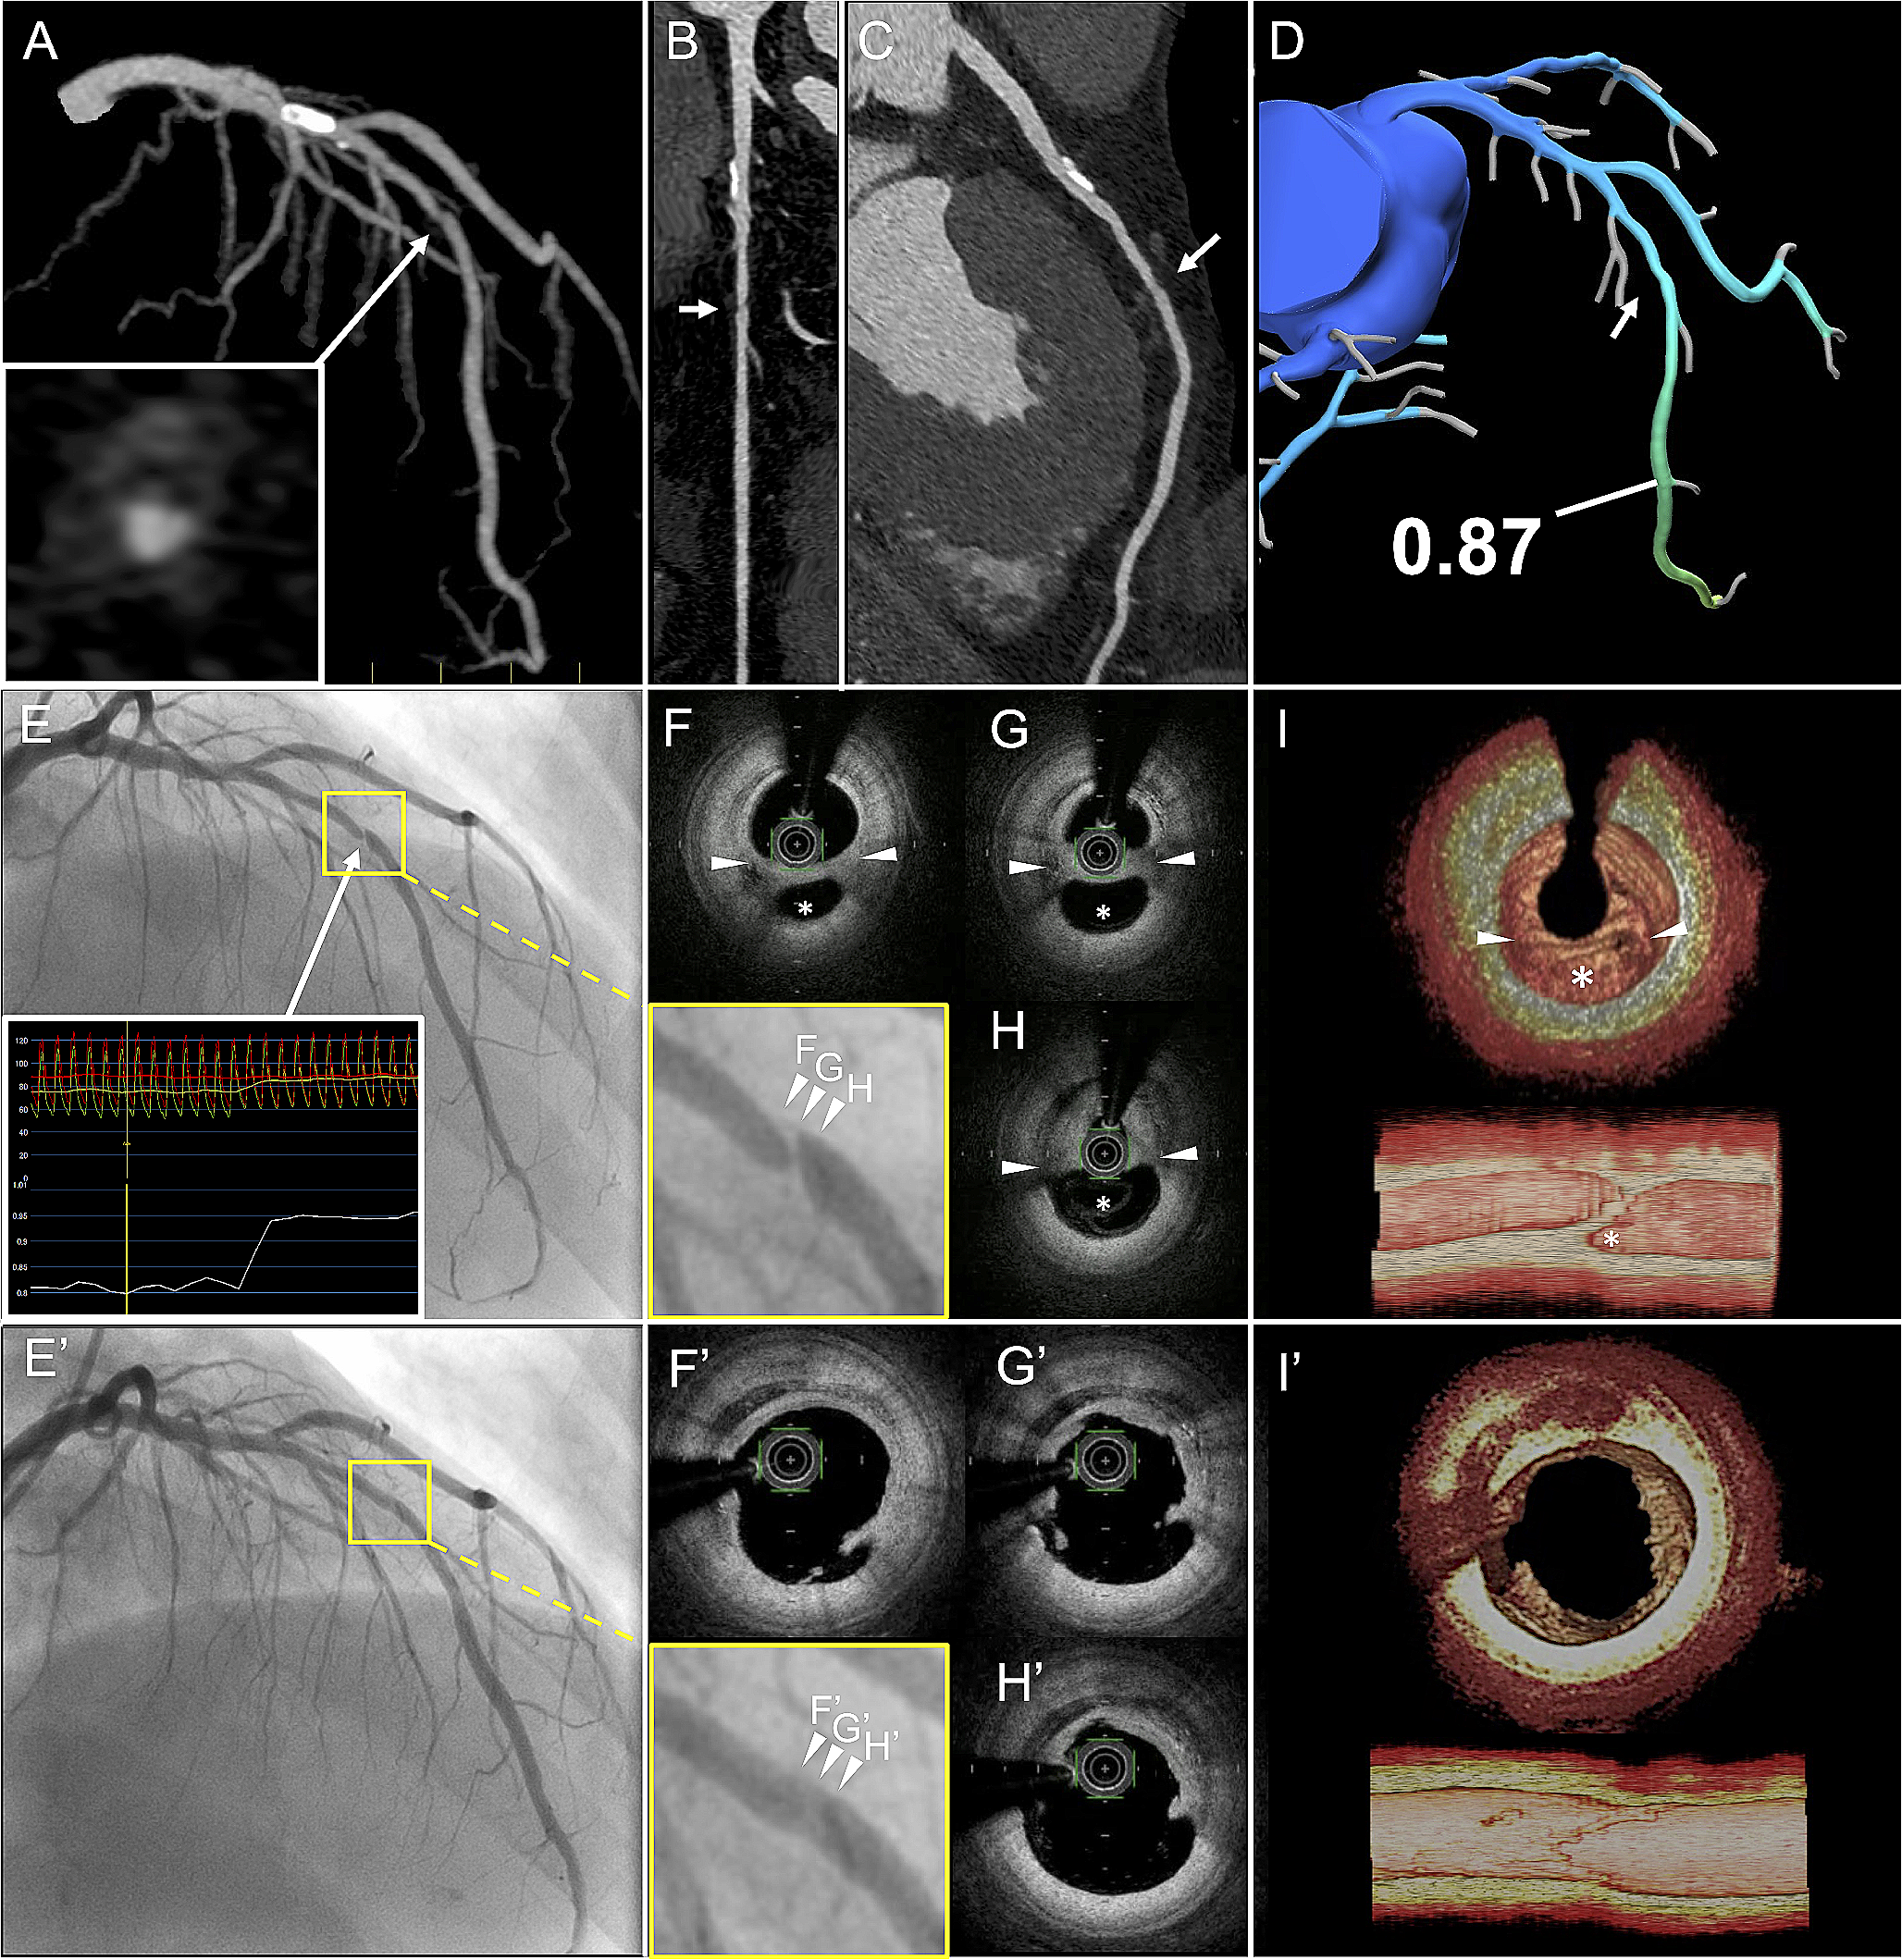 Lesion of slit-like stenosis underestimated by fractional flow reserve based on computed tomography images